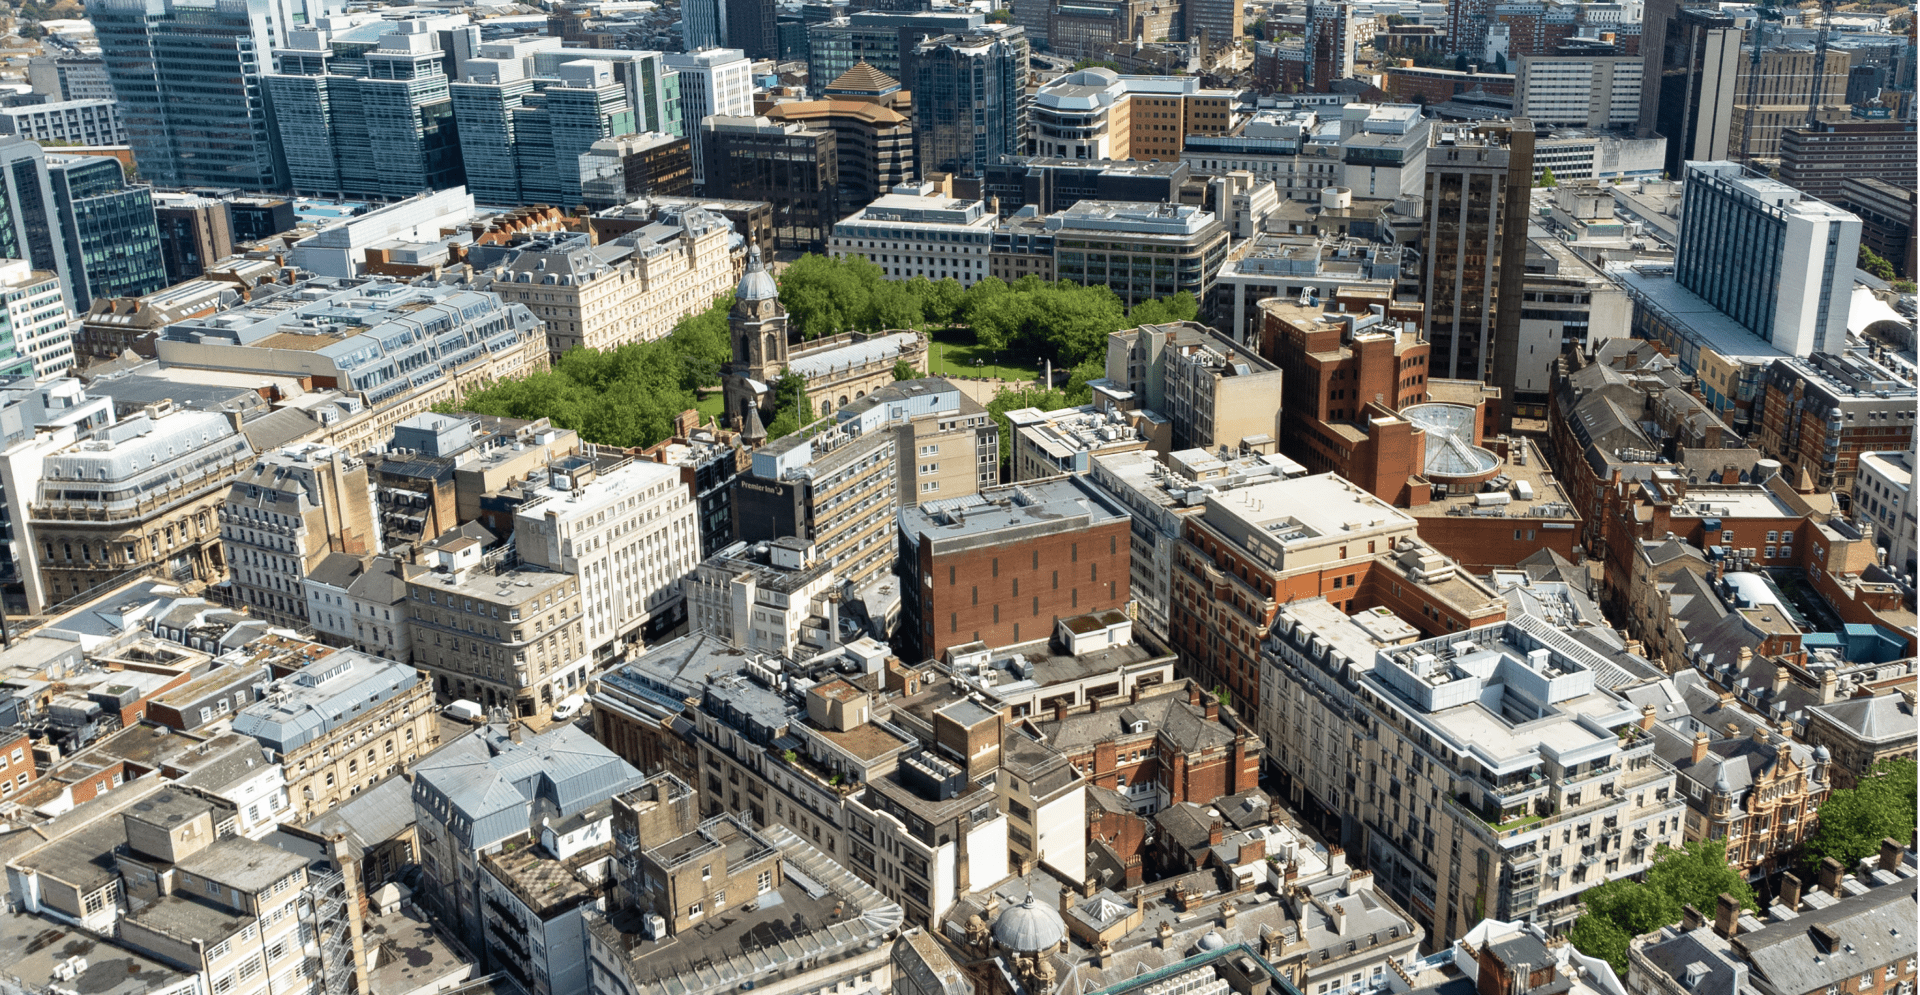 Aerial view of London cityscape from a building's rooftop, showcasing the urban landscape and iconic landmarks.